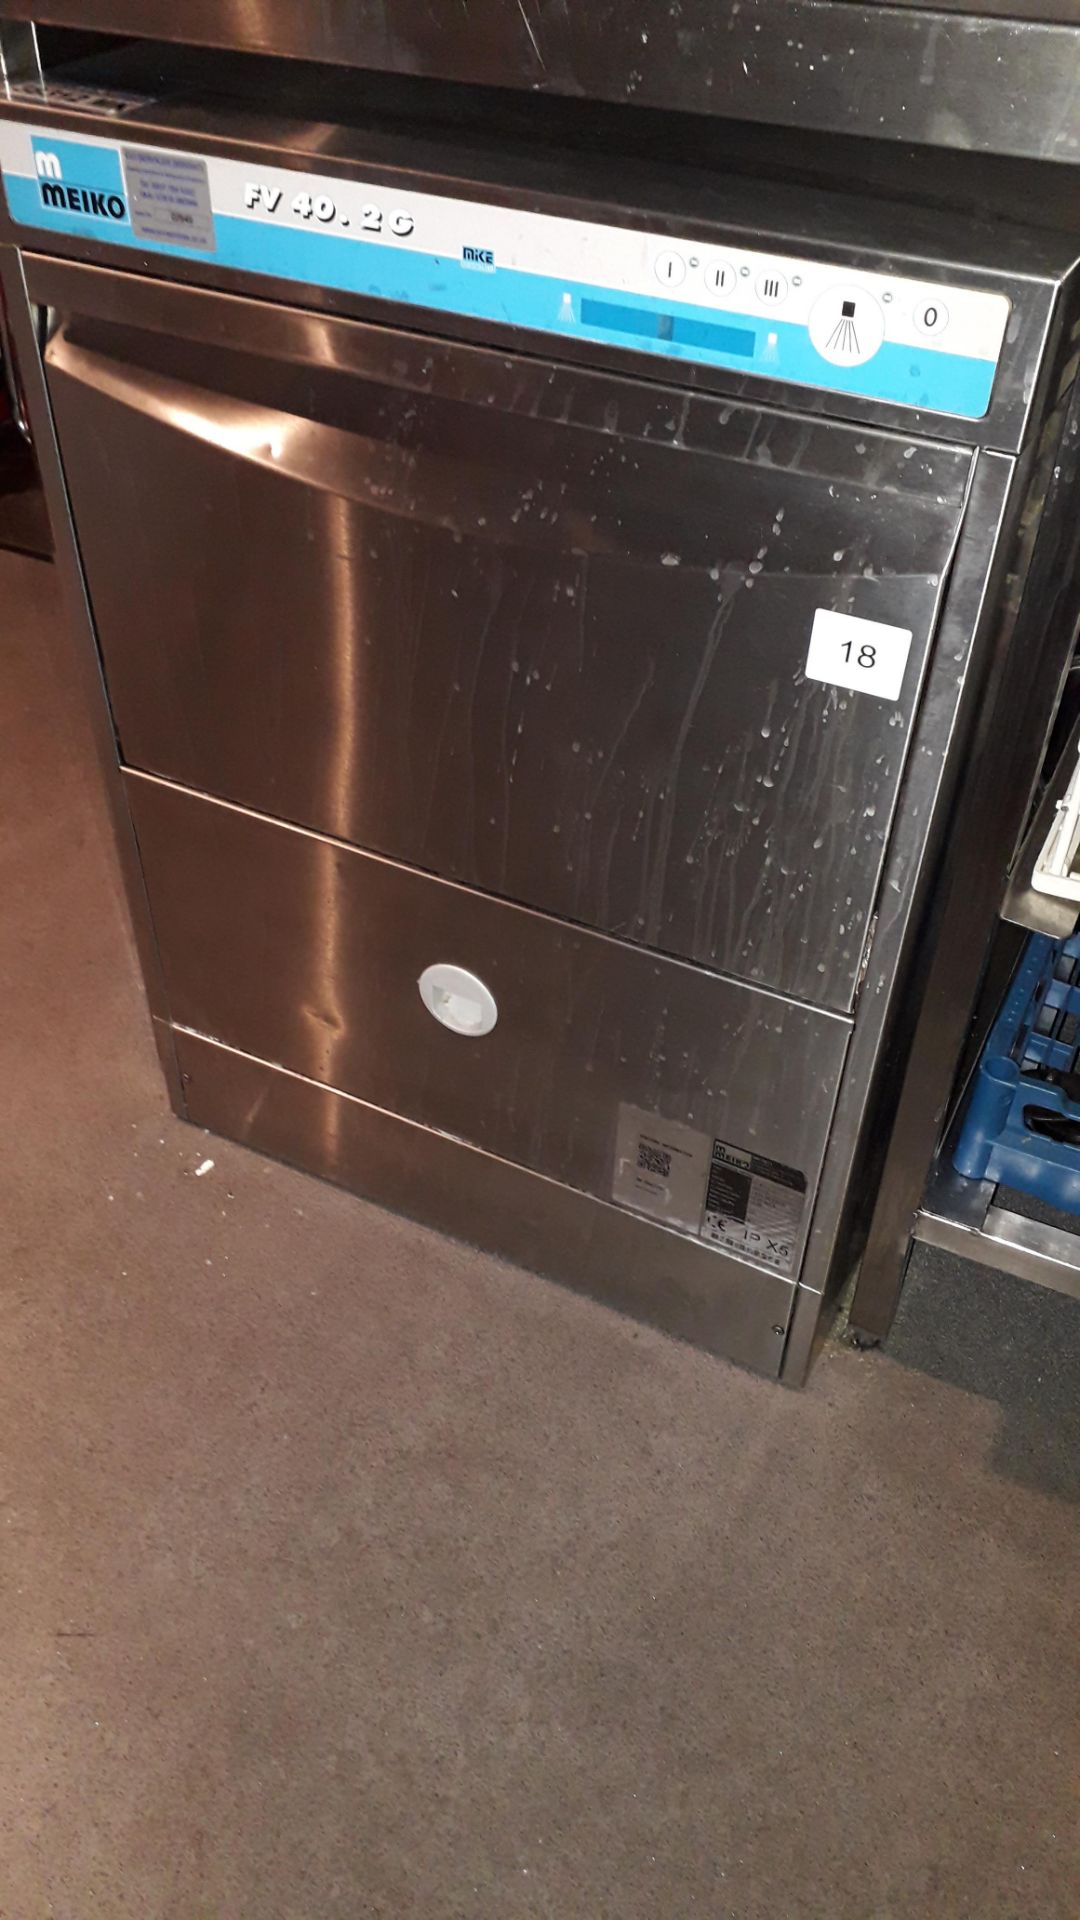 Meiko FV40.2G stainless steel Glasswasher, serial number 10347770